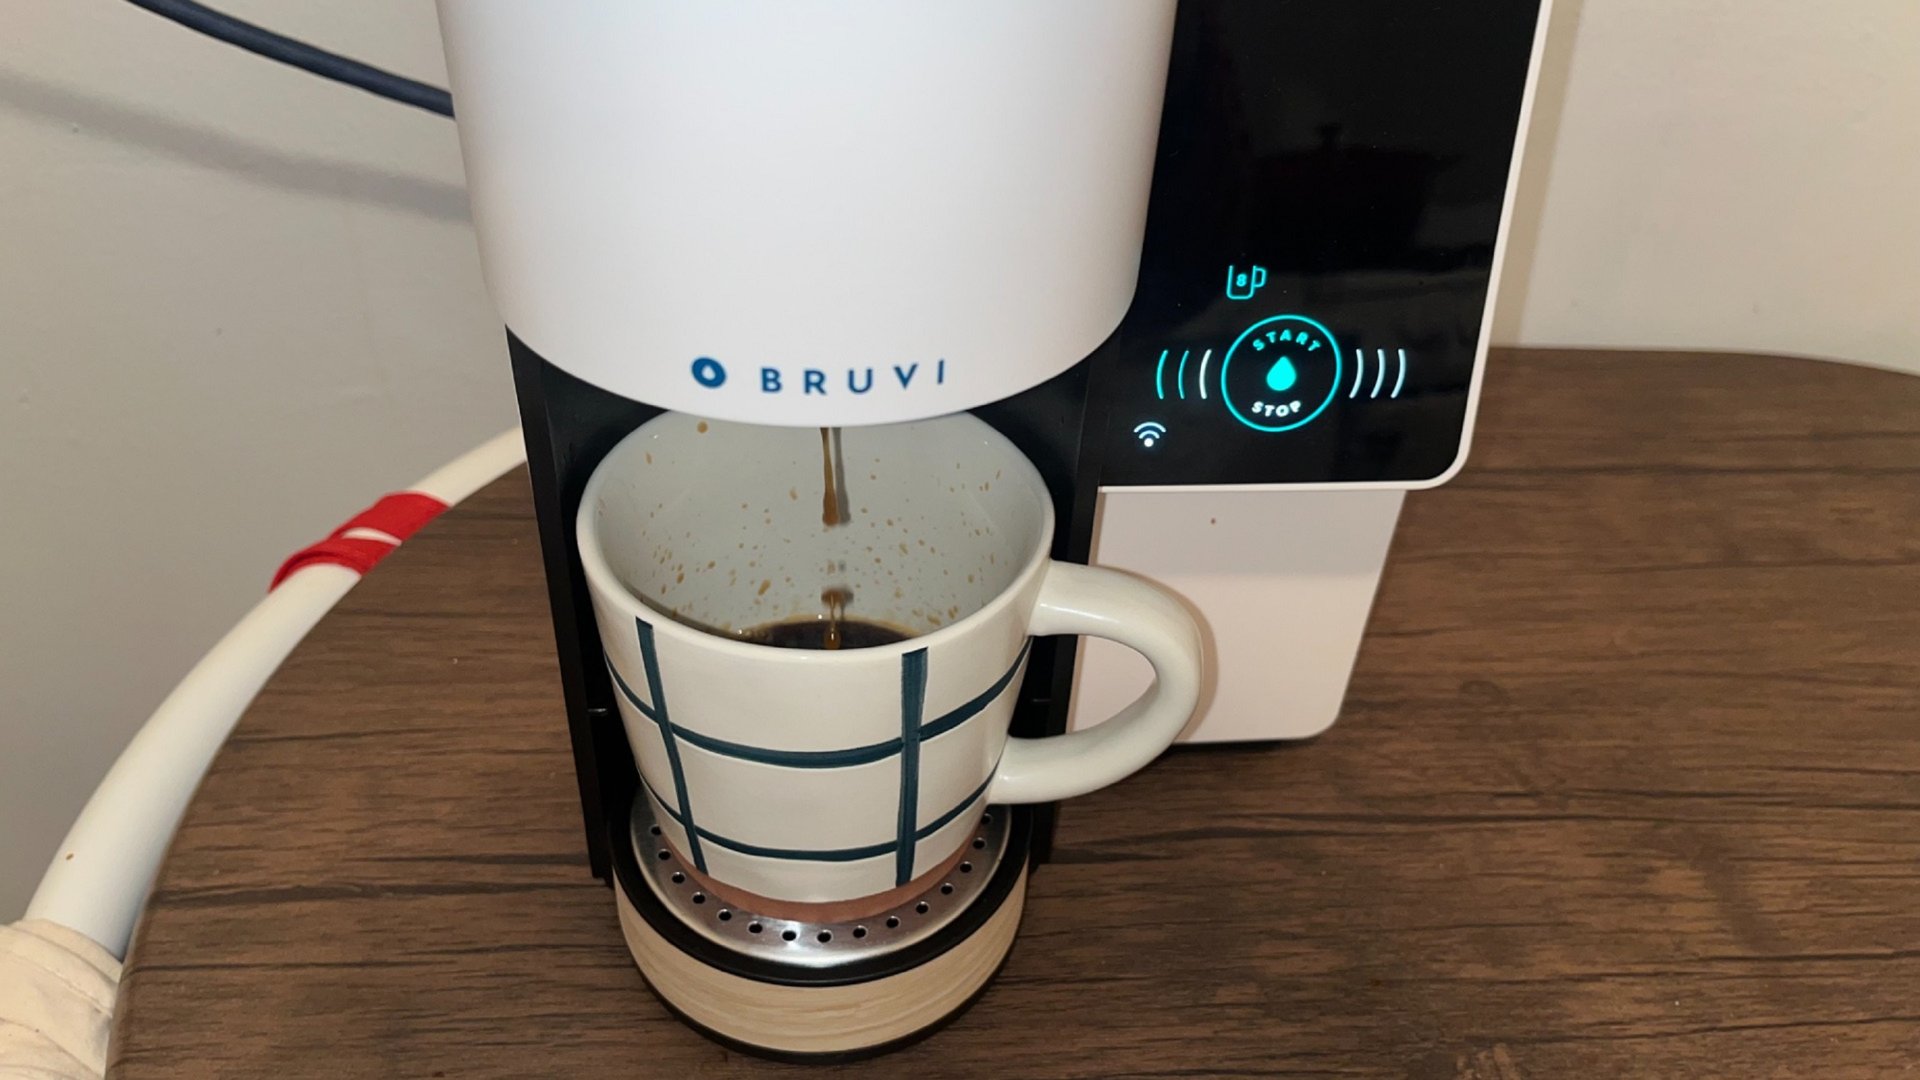 pour into a cup with the bruvi coffee maker